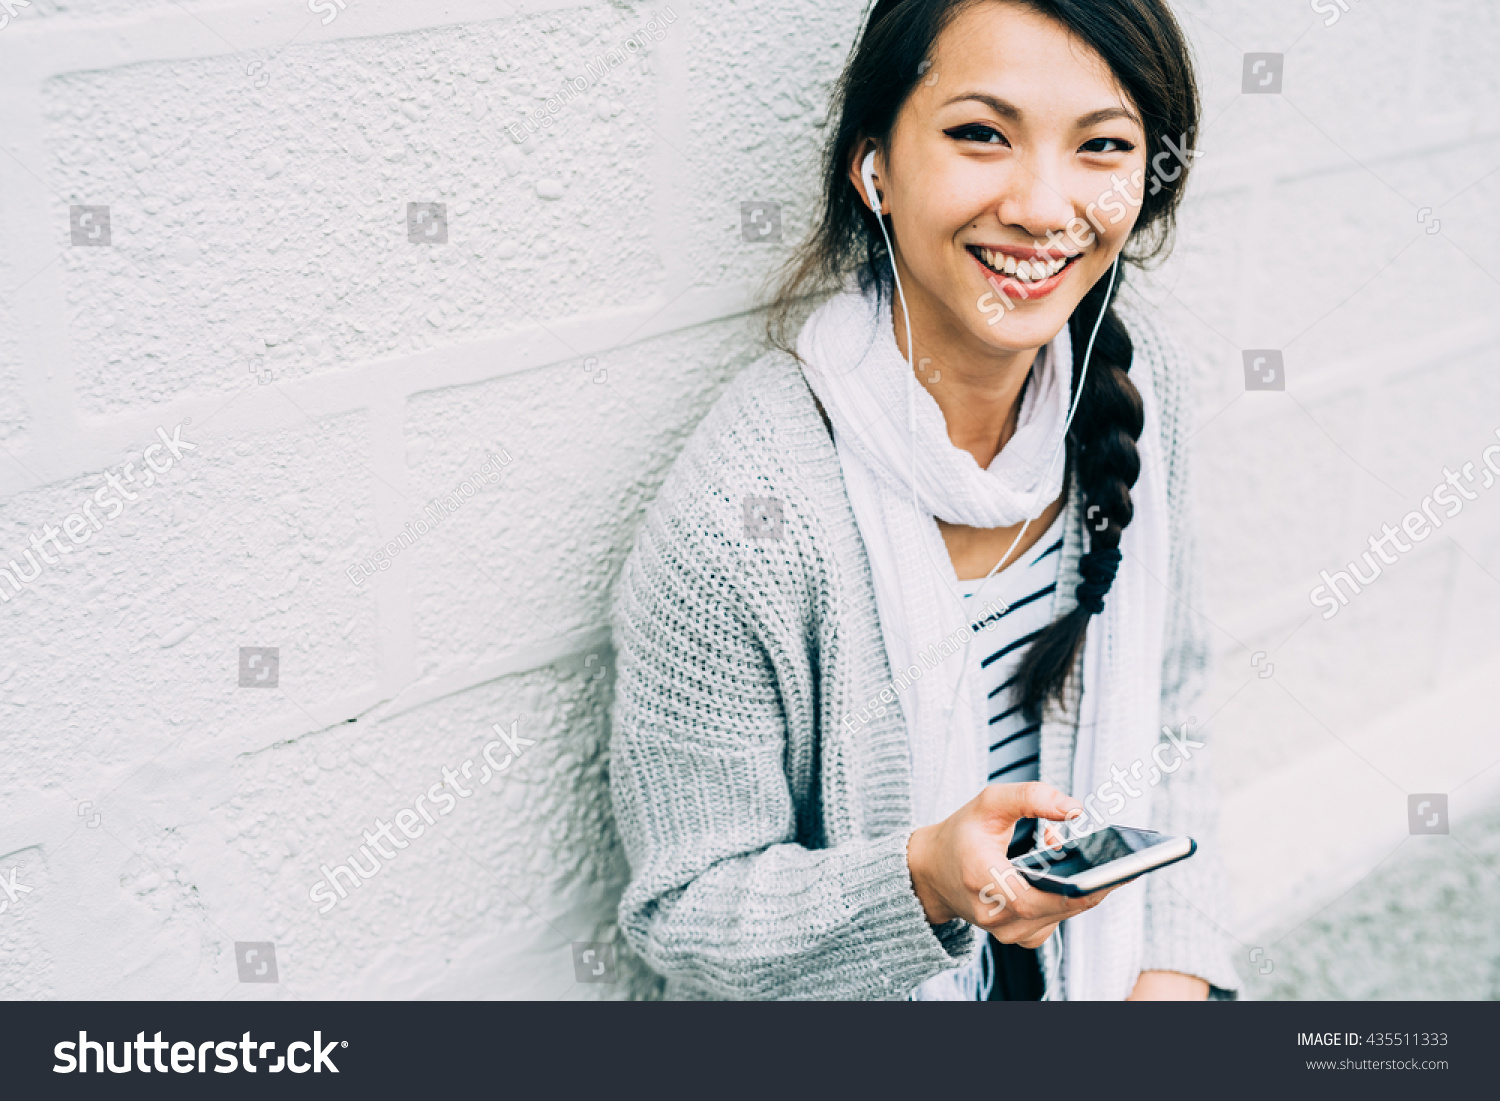 Half length of young beautiful asiatic woman holding a smart phone listening music with earphones, looking in camera, smiling - technology, happiness, music concept #435511333